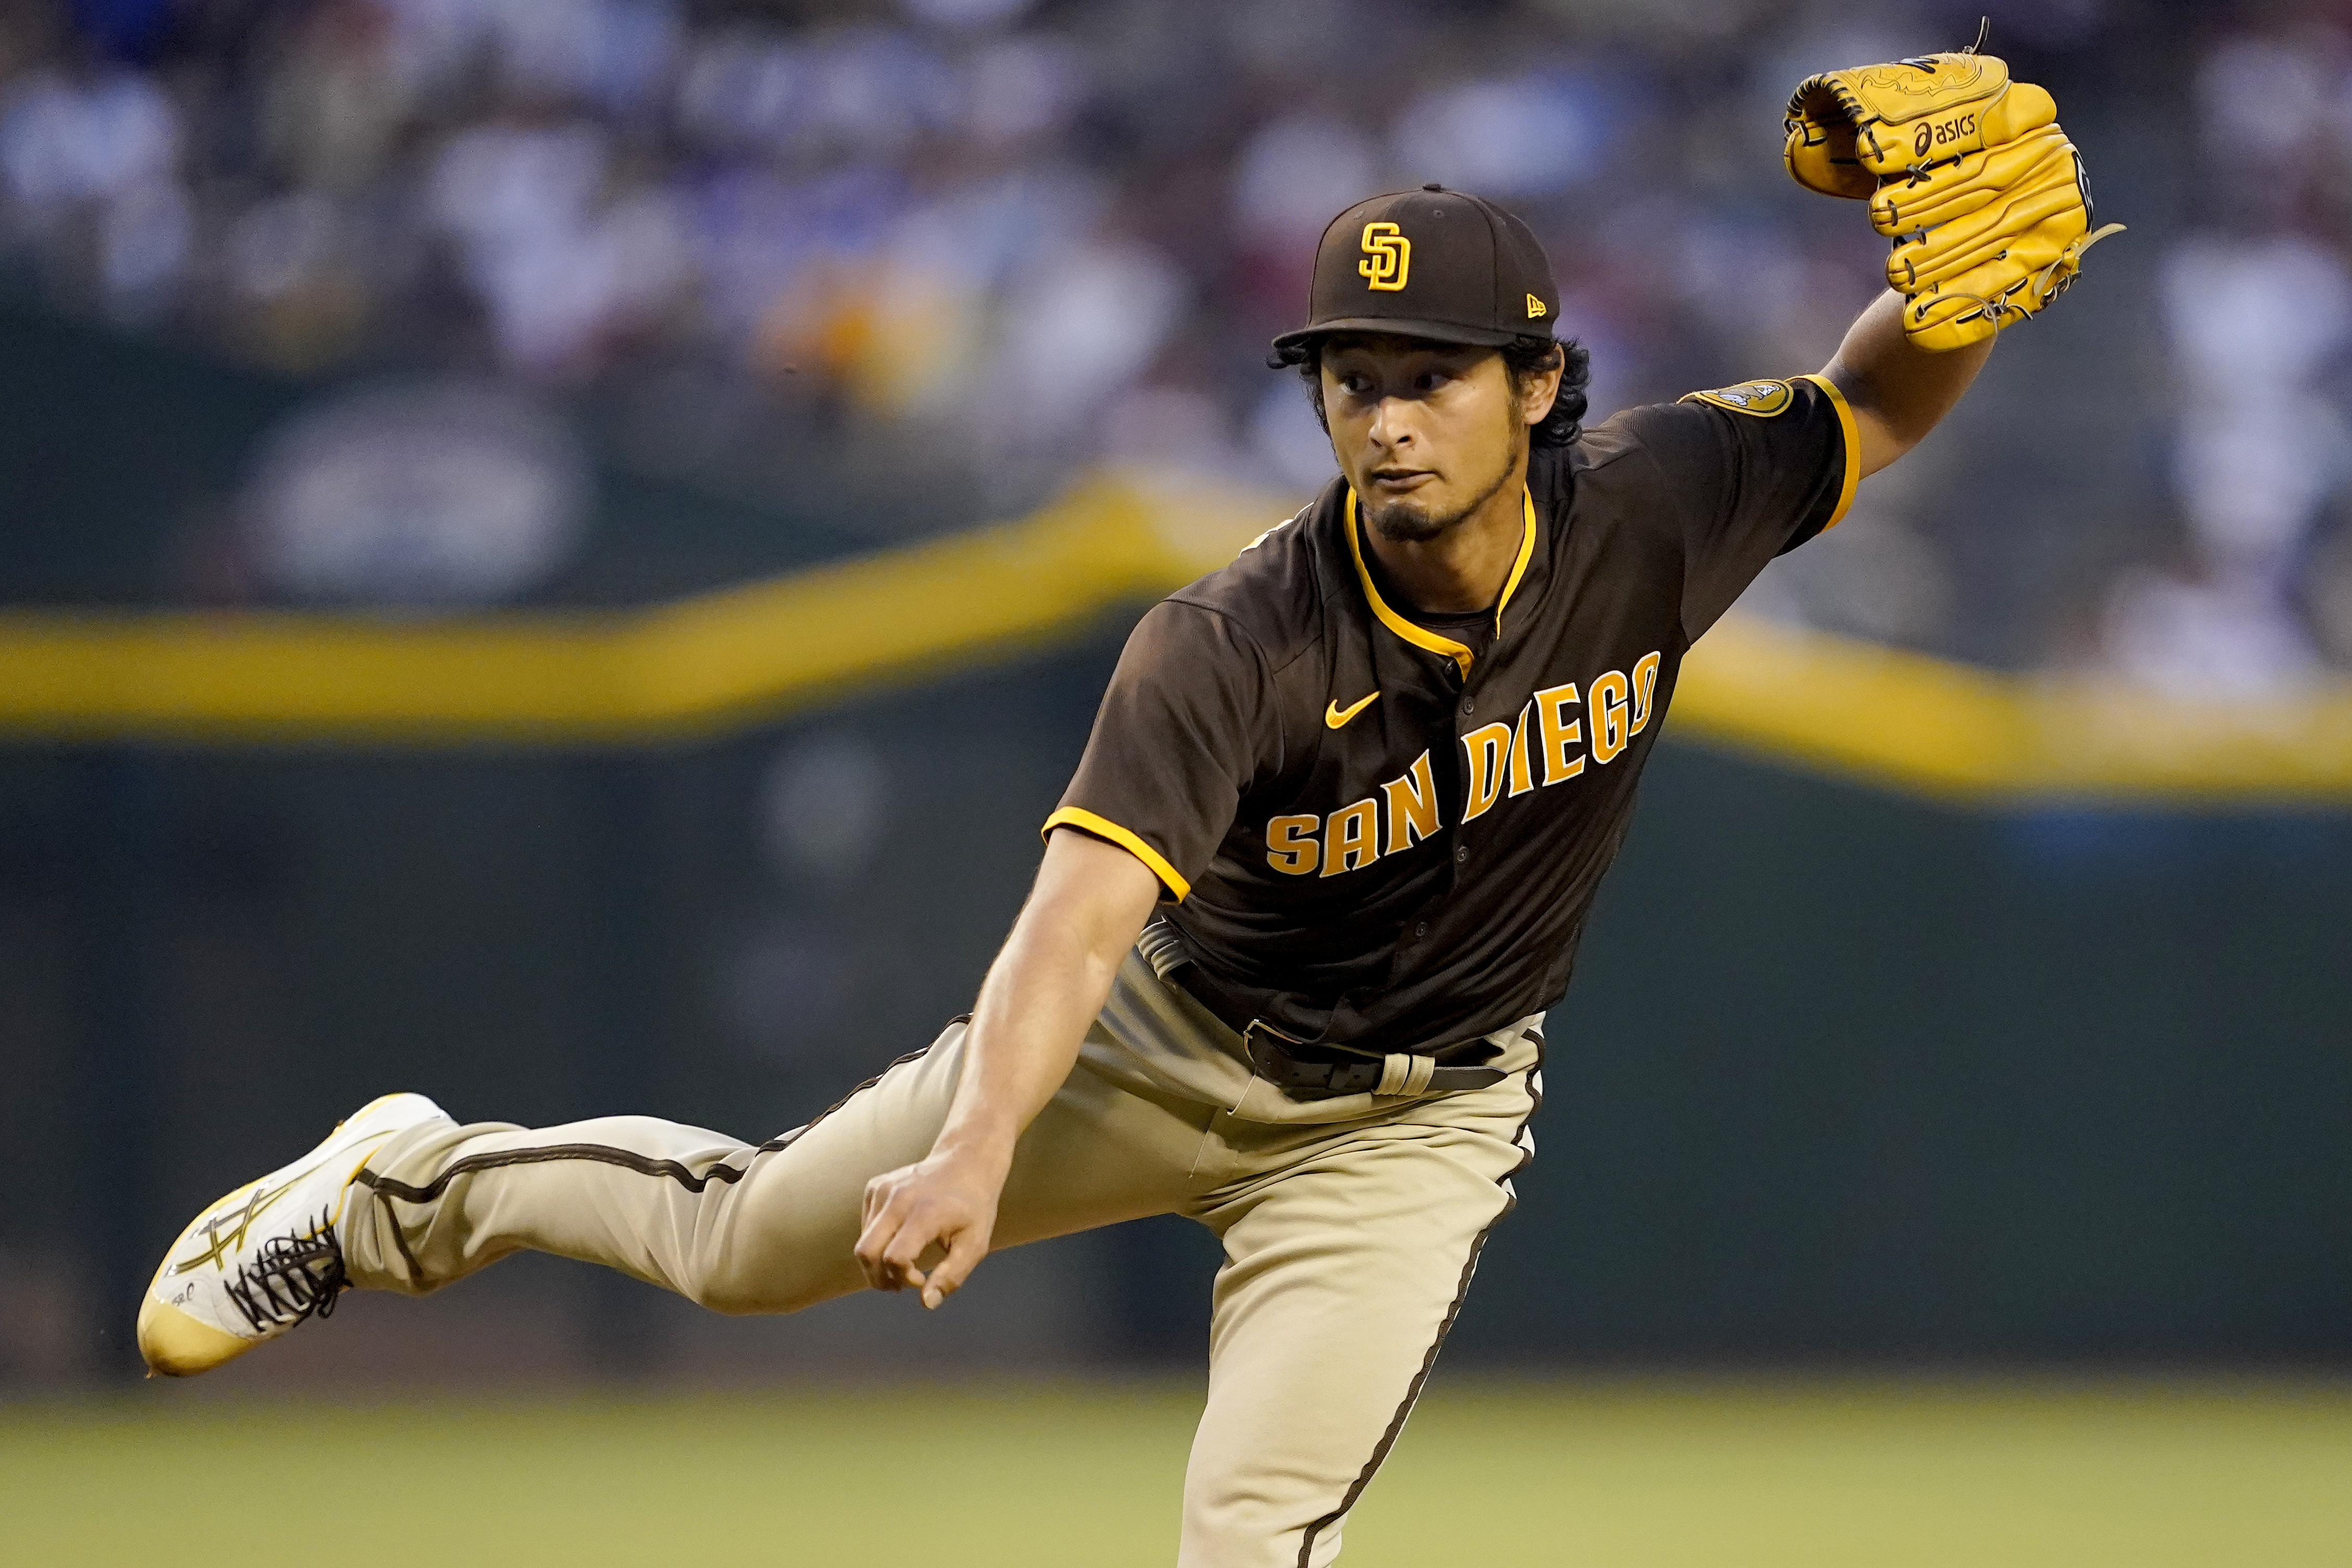 There is another Darvish on his way to crush MLB hitters for